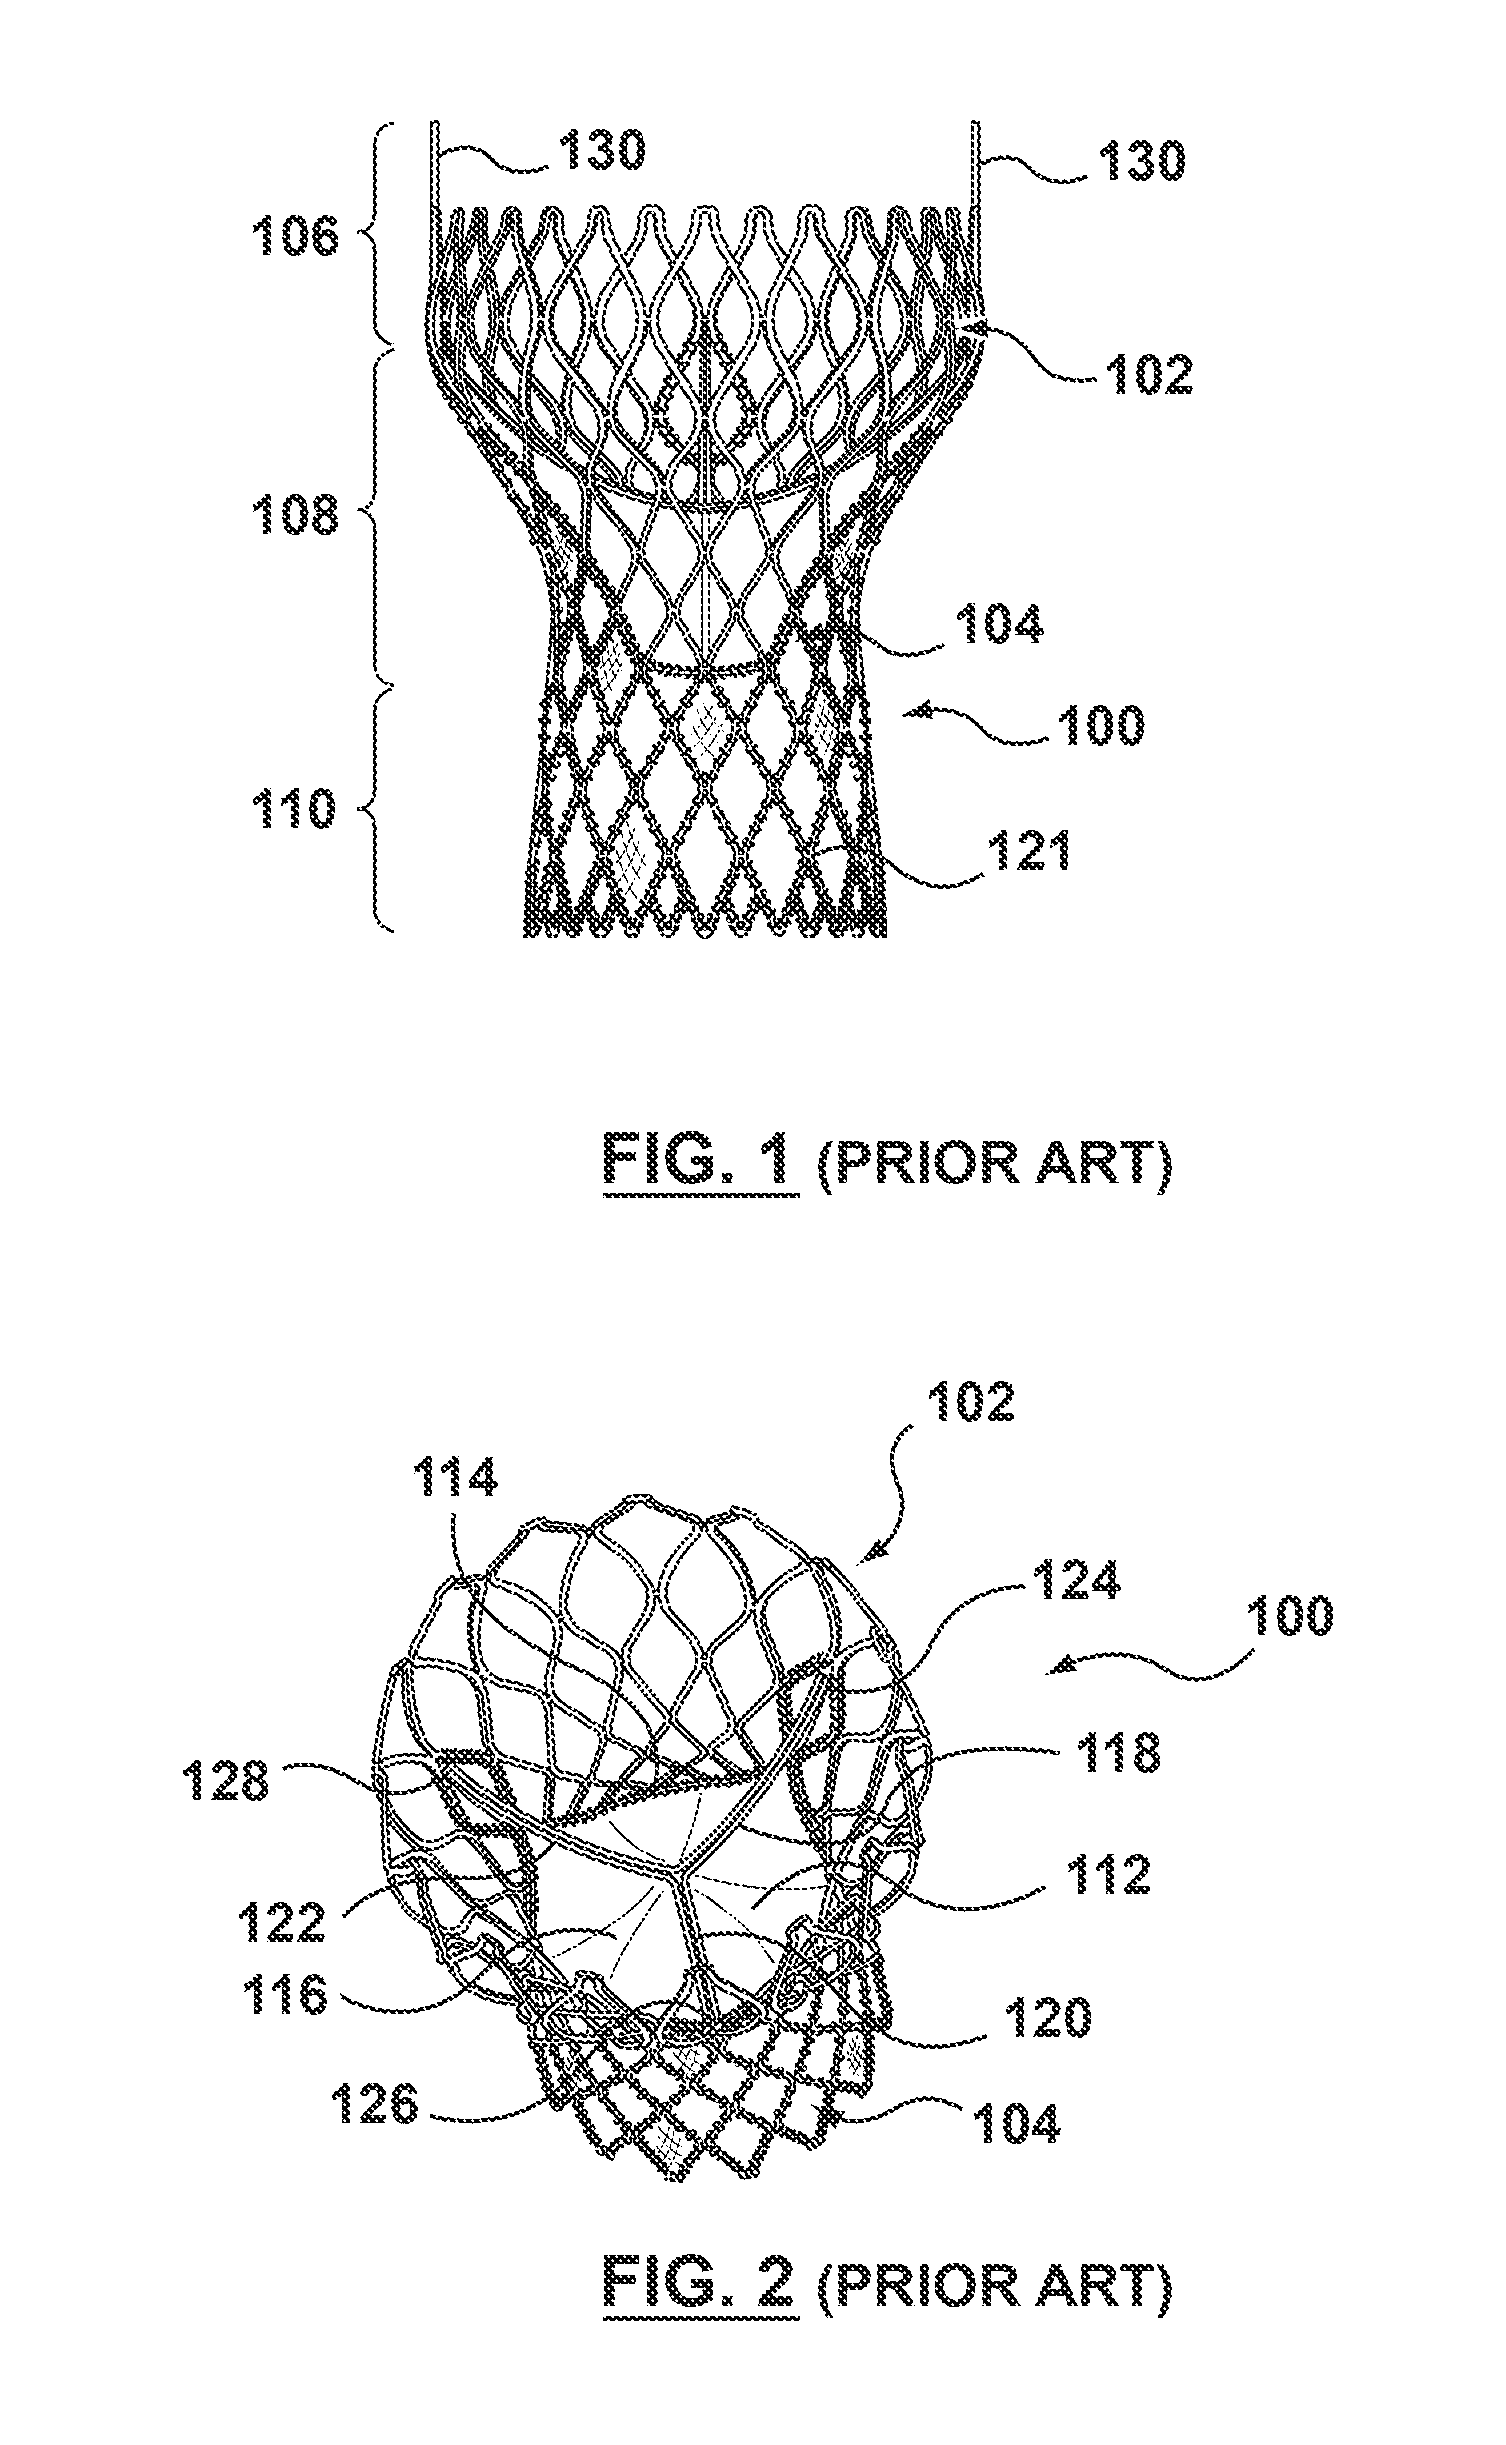 Modular valve prosthesis with anchor stent and valve component